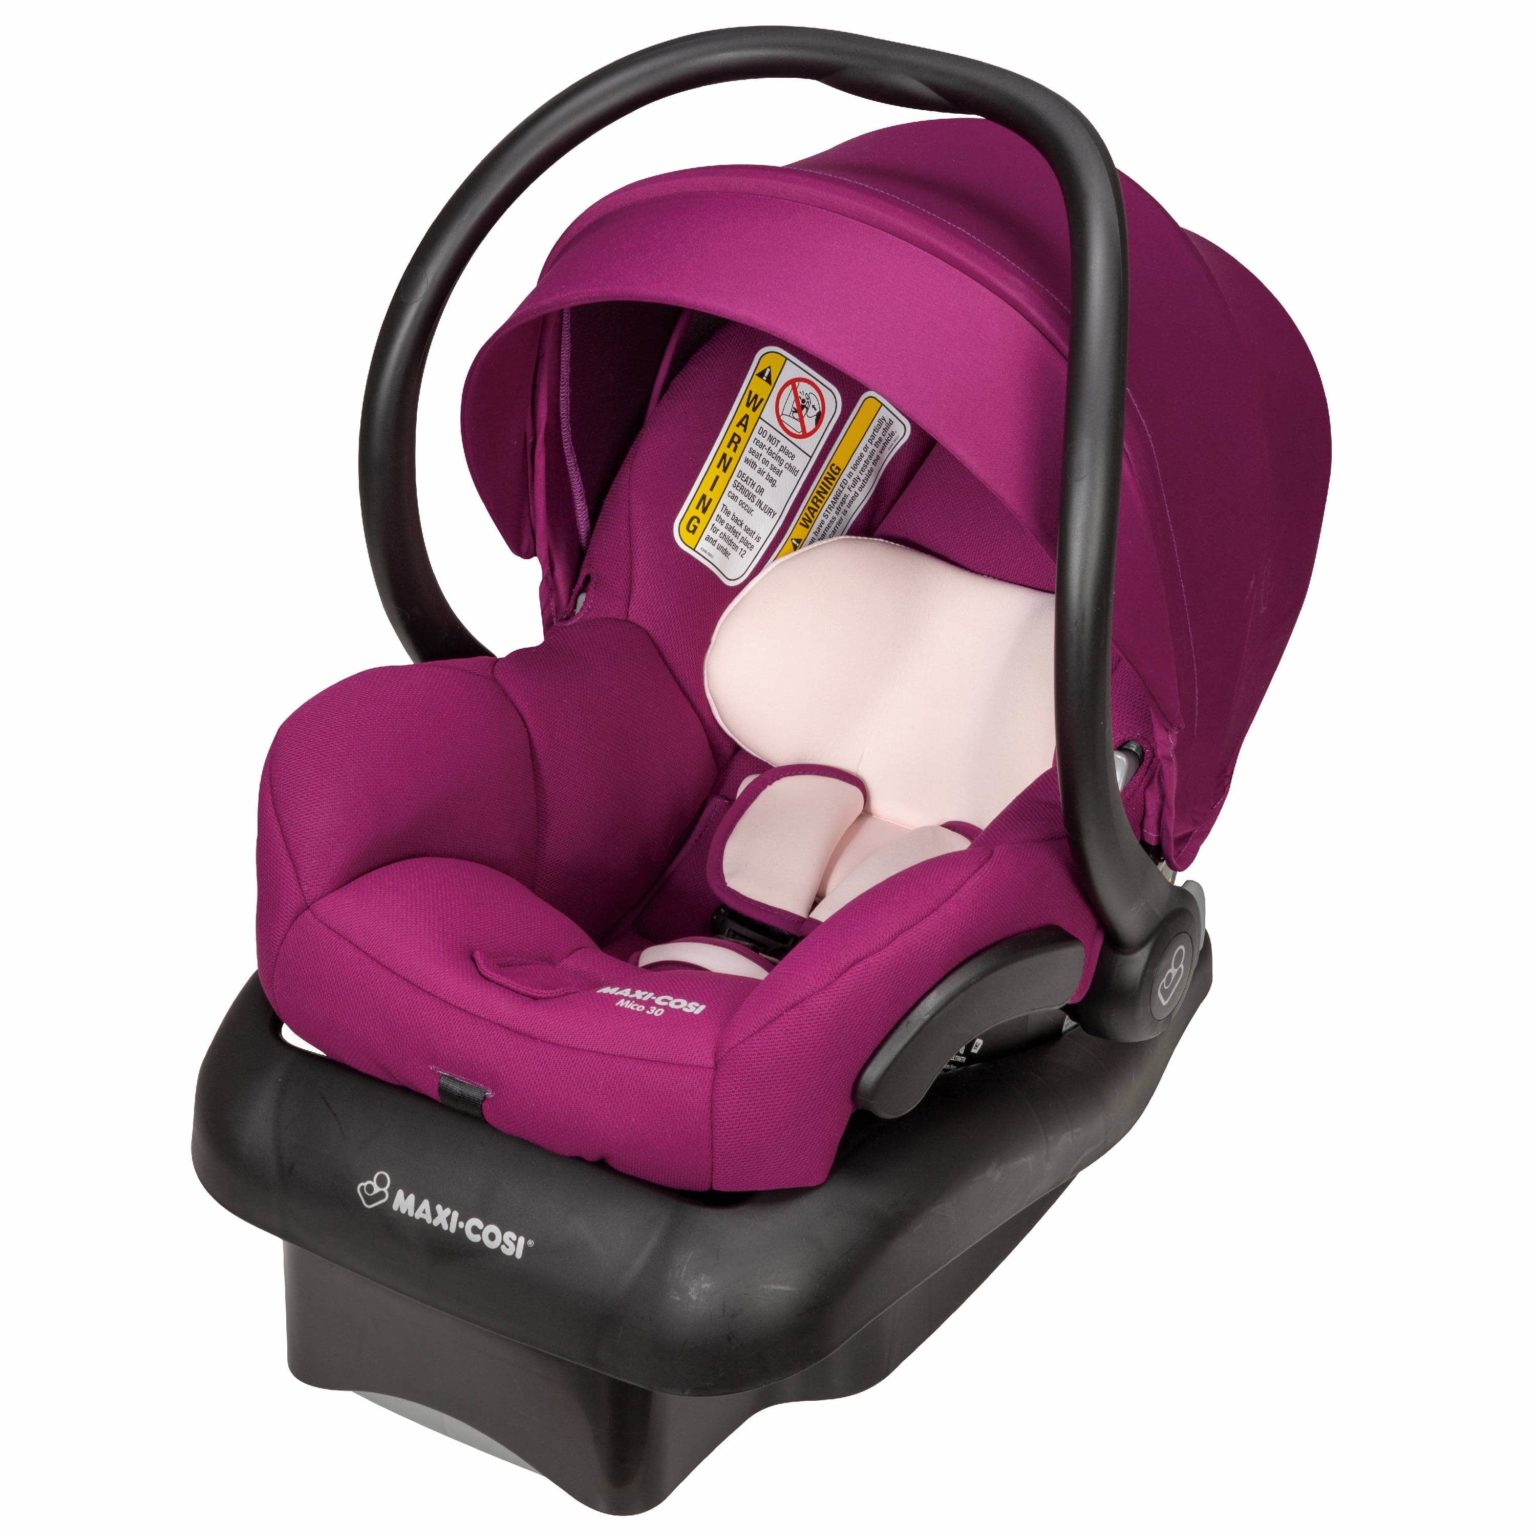 Best Pink Infant Car Seats in 2020 - The Mood Guide